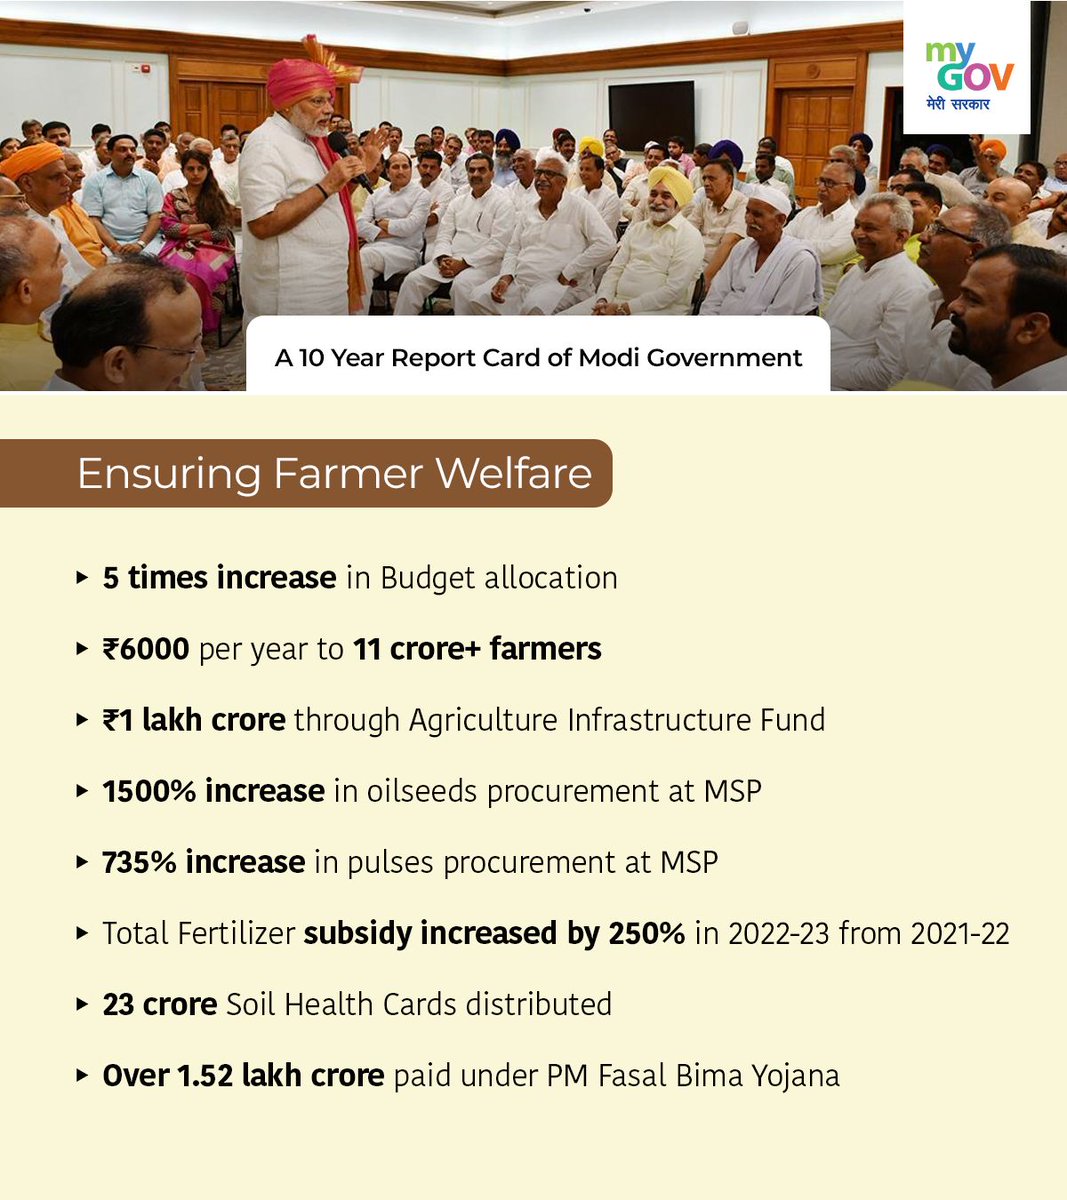 India prioritizes farmer welfare through budget allocations, MSPs, and insurance schemes, ensuring livelihood security and agricultural sustainability. 

#HamaraSankalpViksitBharat